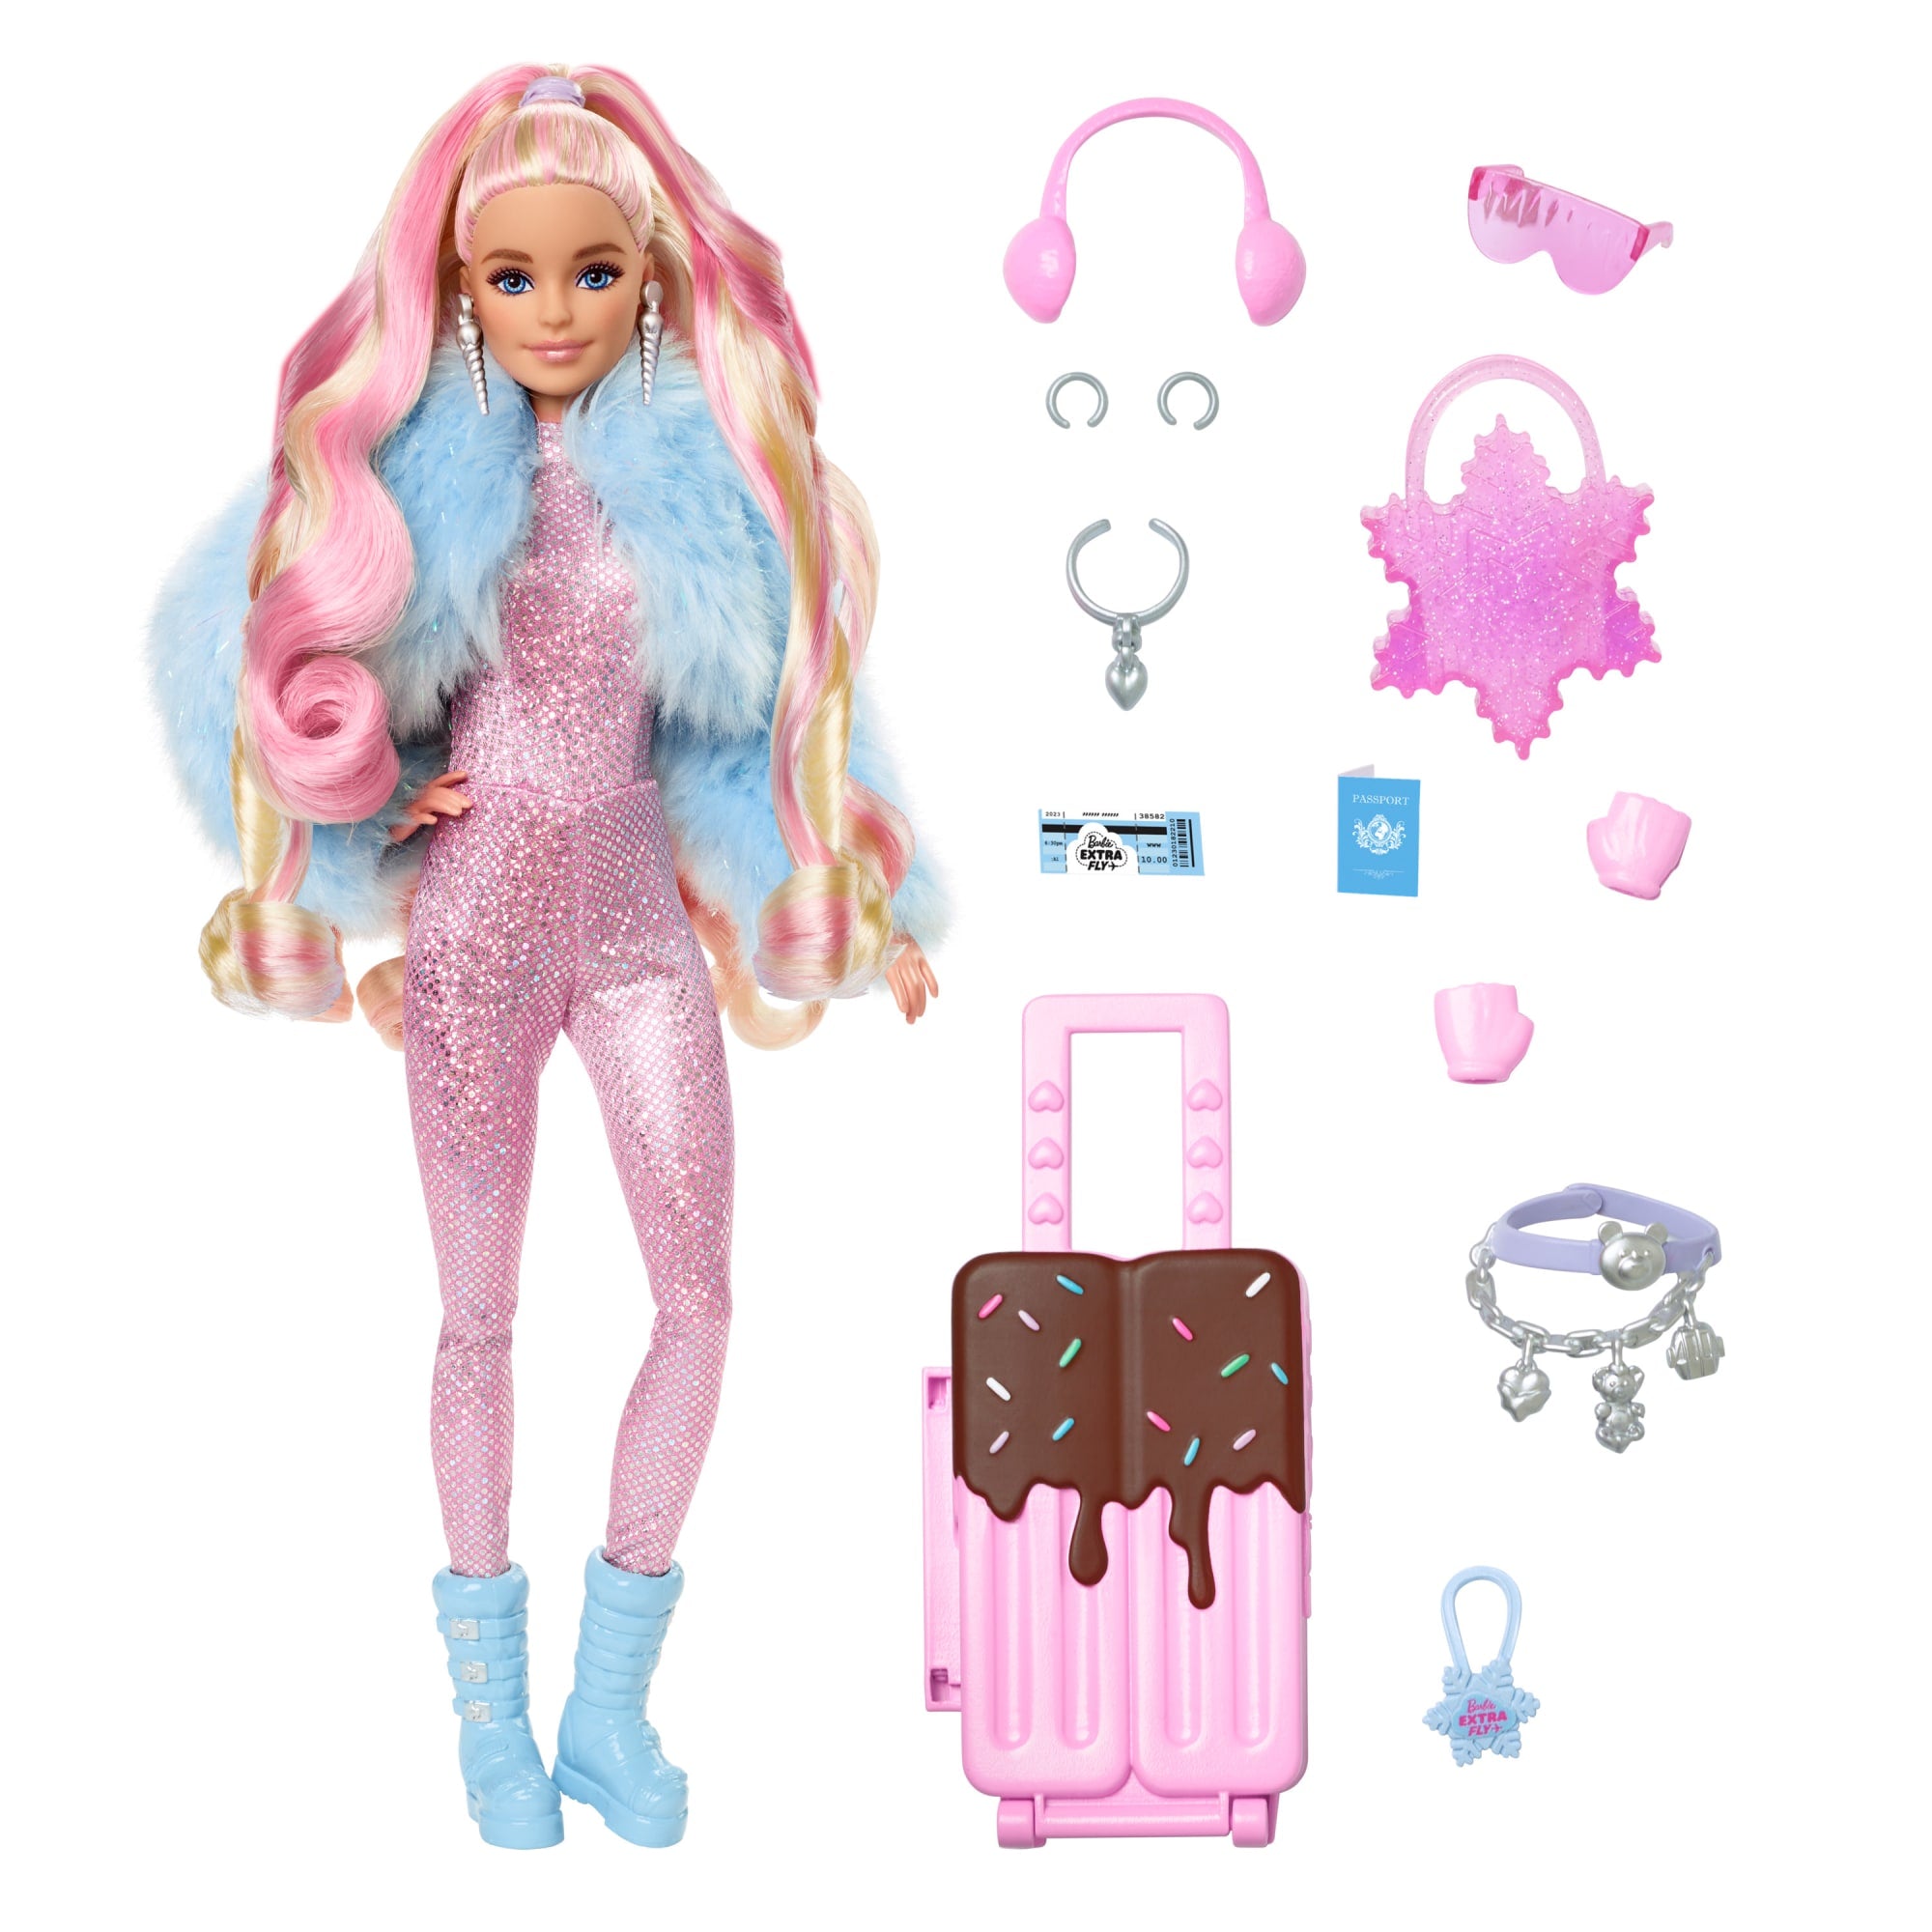 Barbie Doll with Winter Look, Barbie Extra Fly